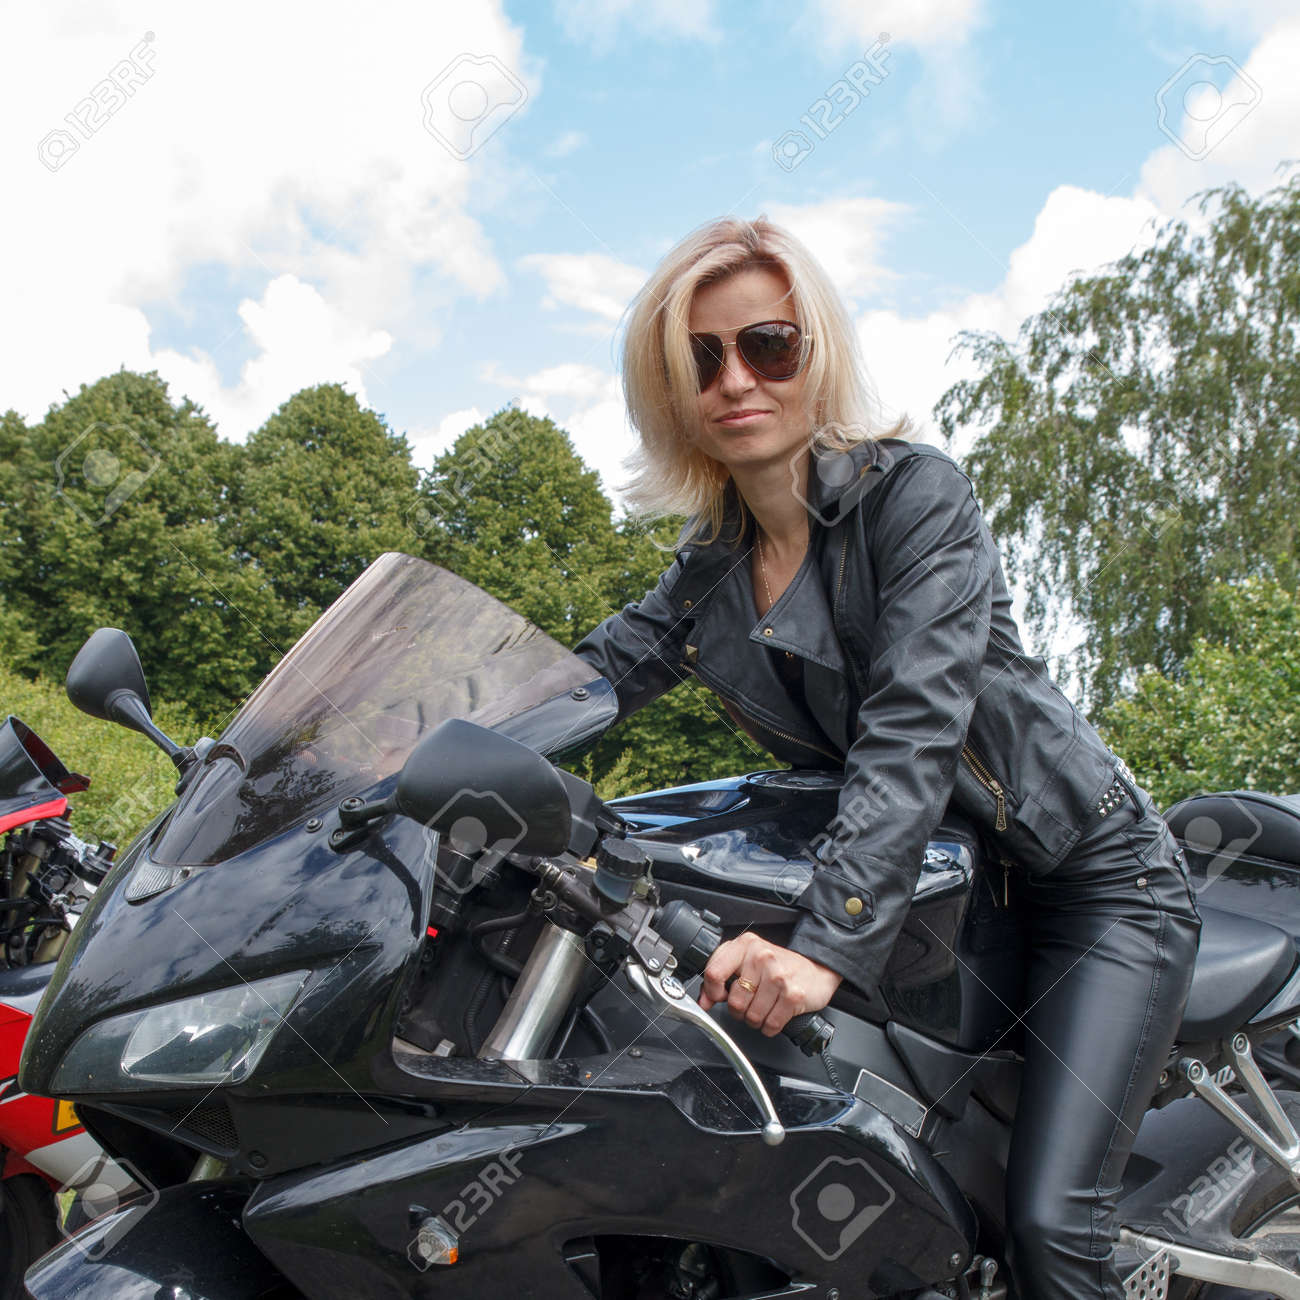 bram andrian add pictures of biker woman photo